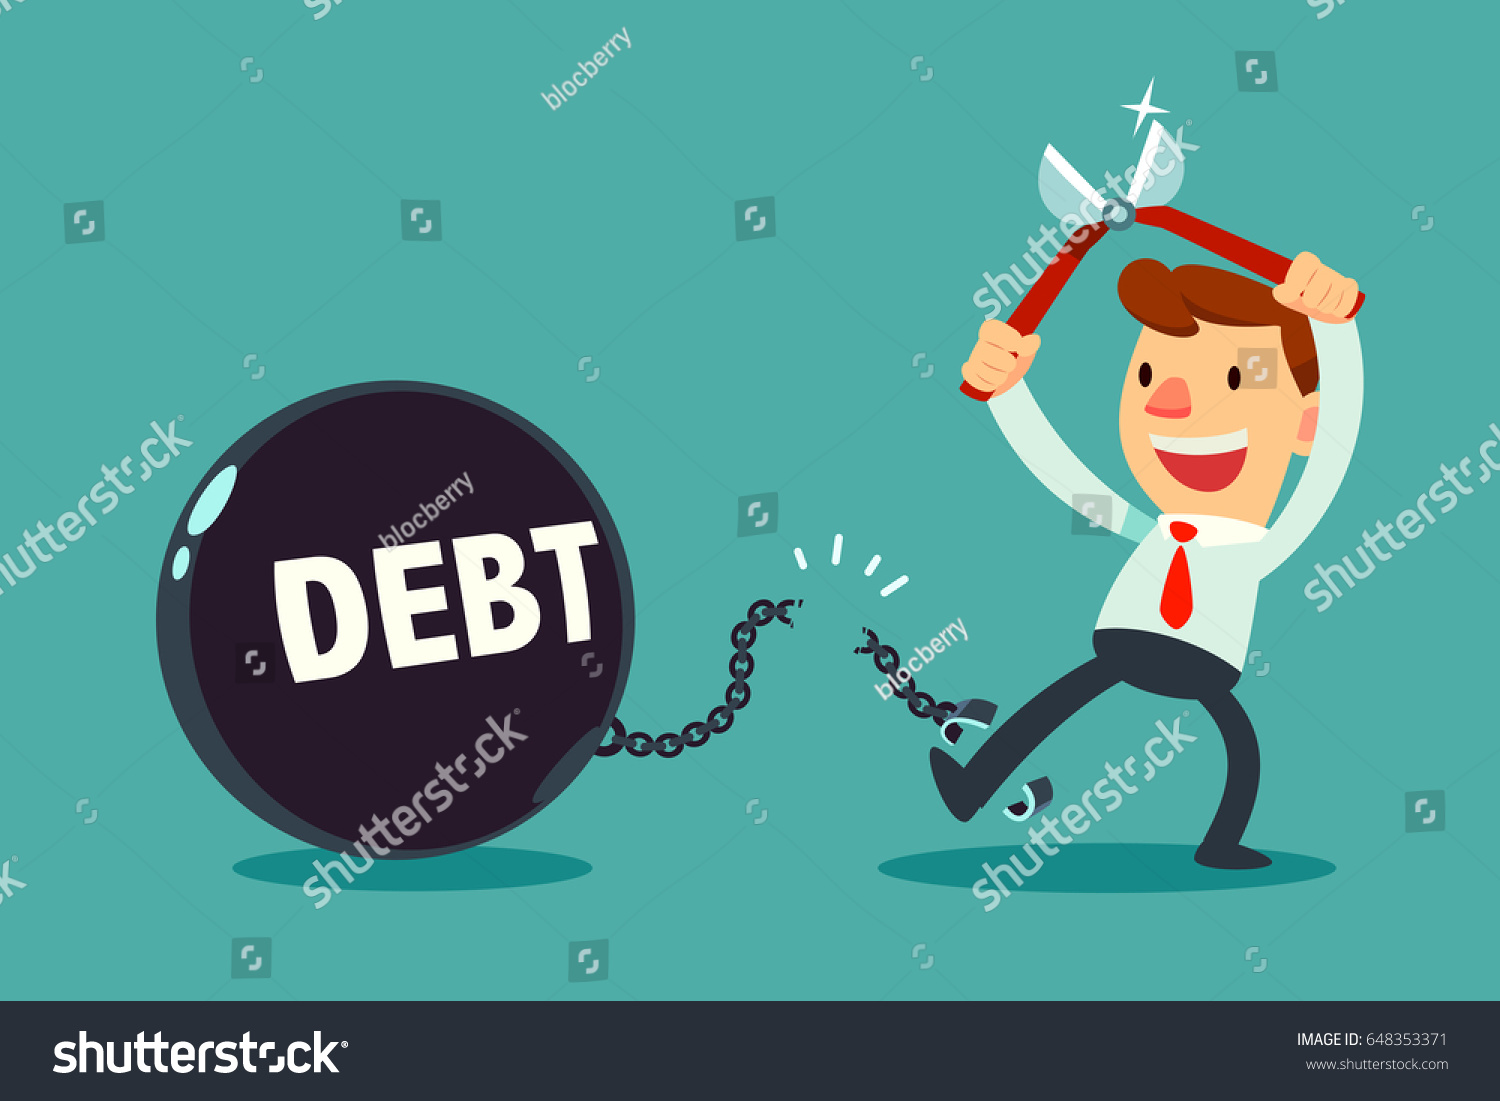 businessman use pliers to cut the chain and free himself from debt metal ball. Financial freedom concept. 